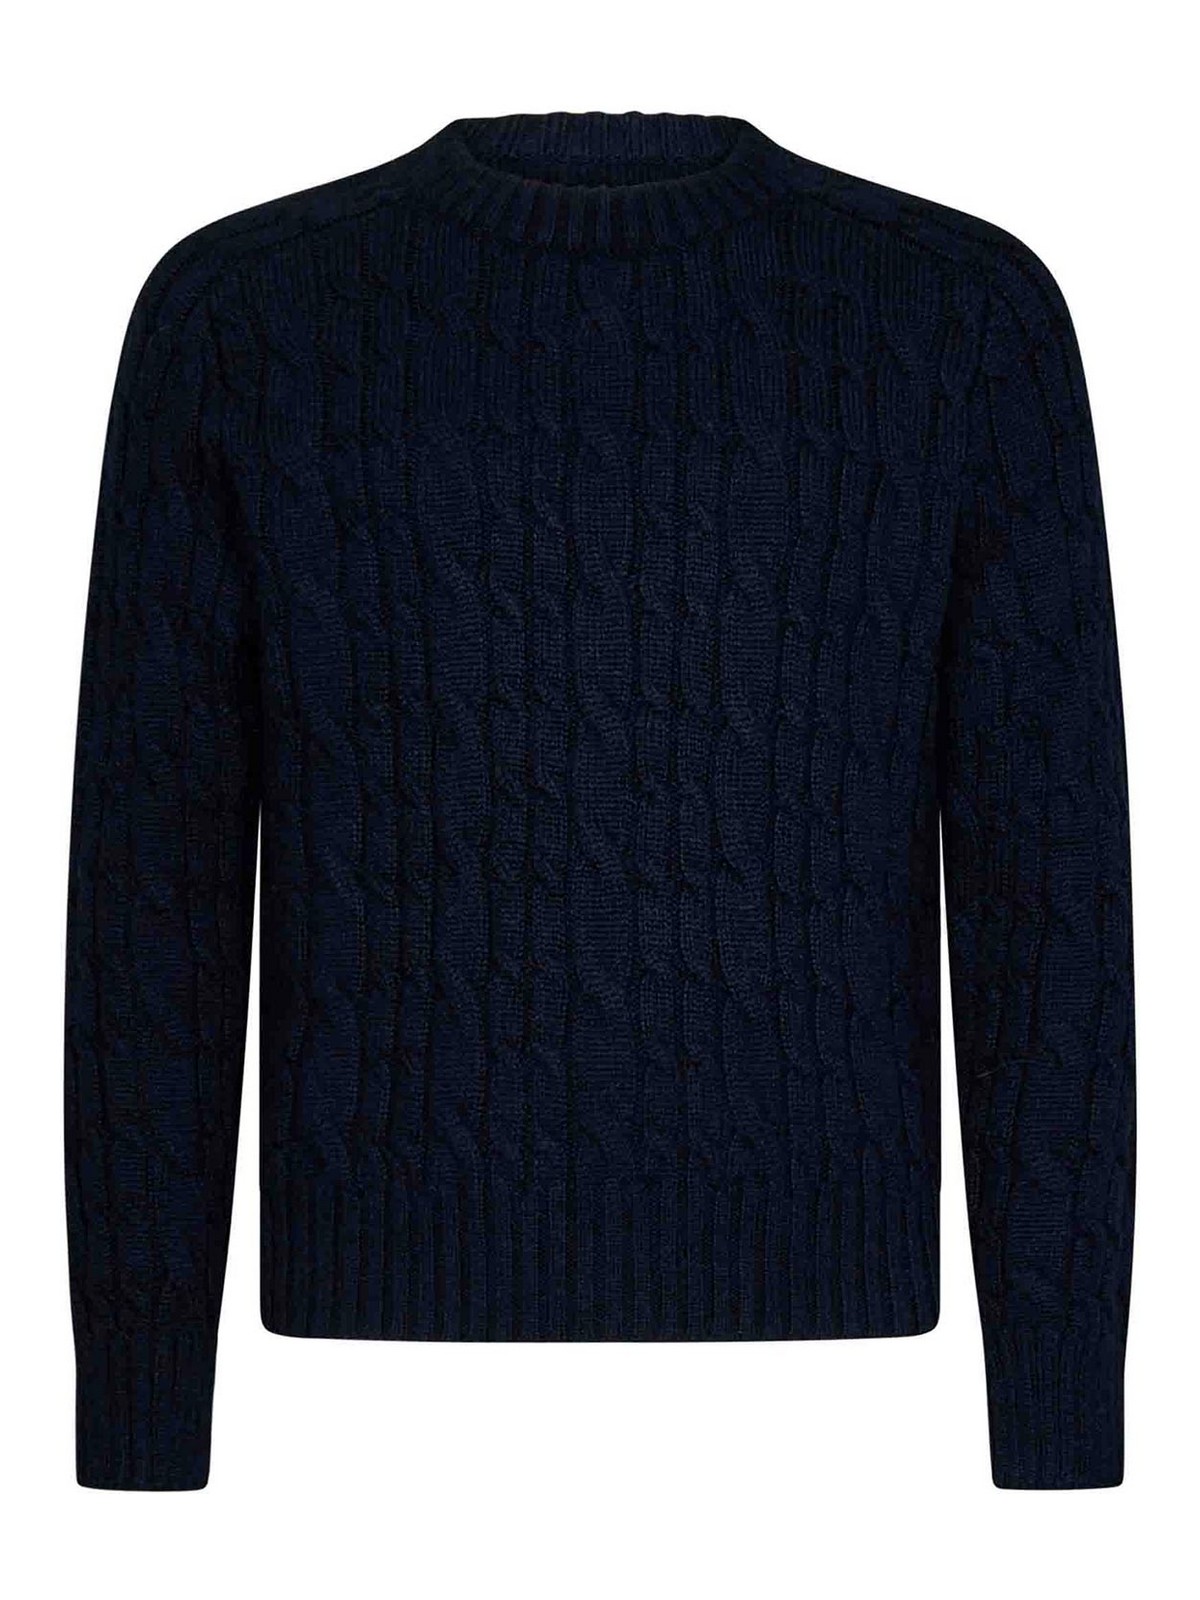 TOM FORD NAVY CABLE-KNIT ALPACA SWEATER